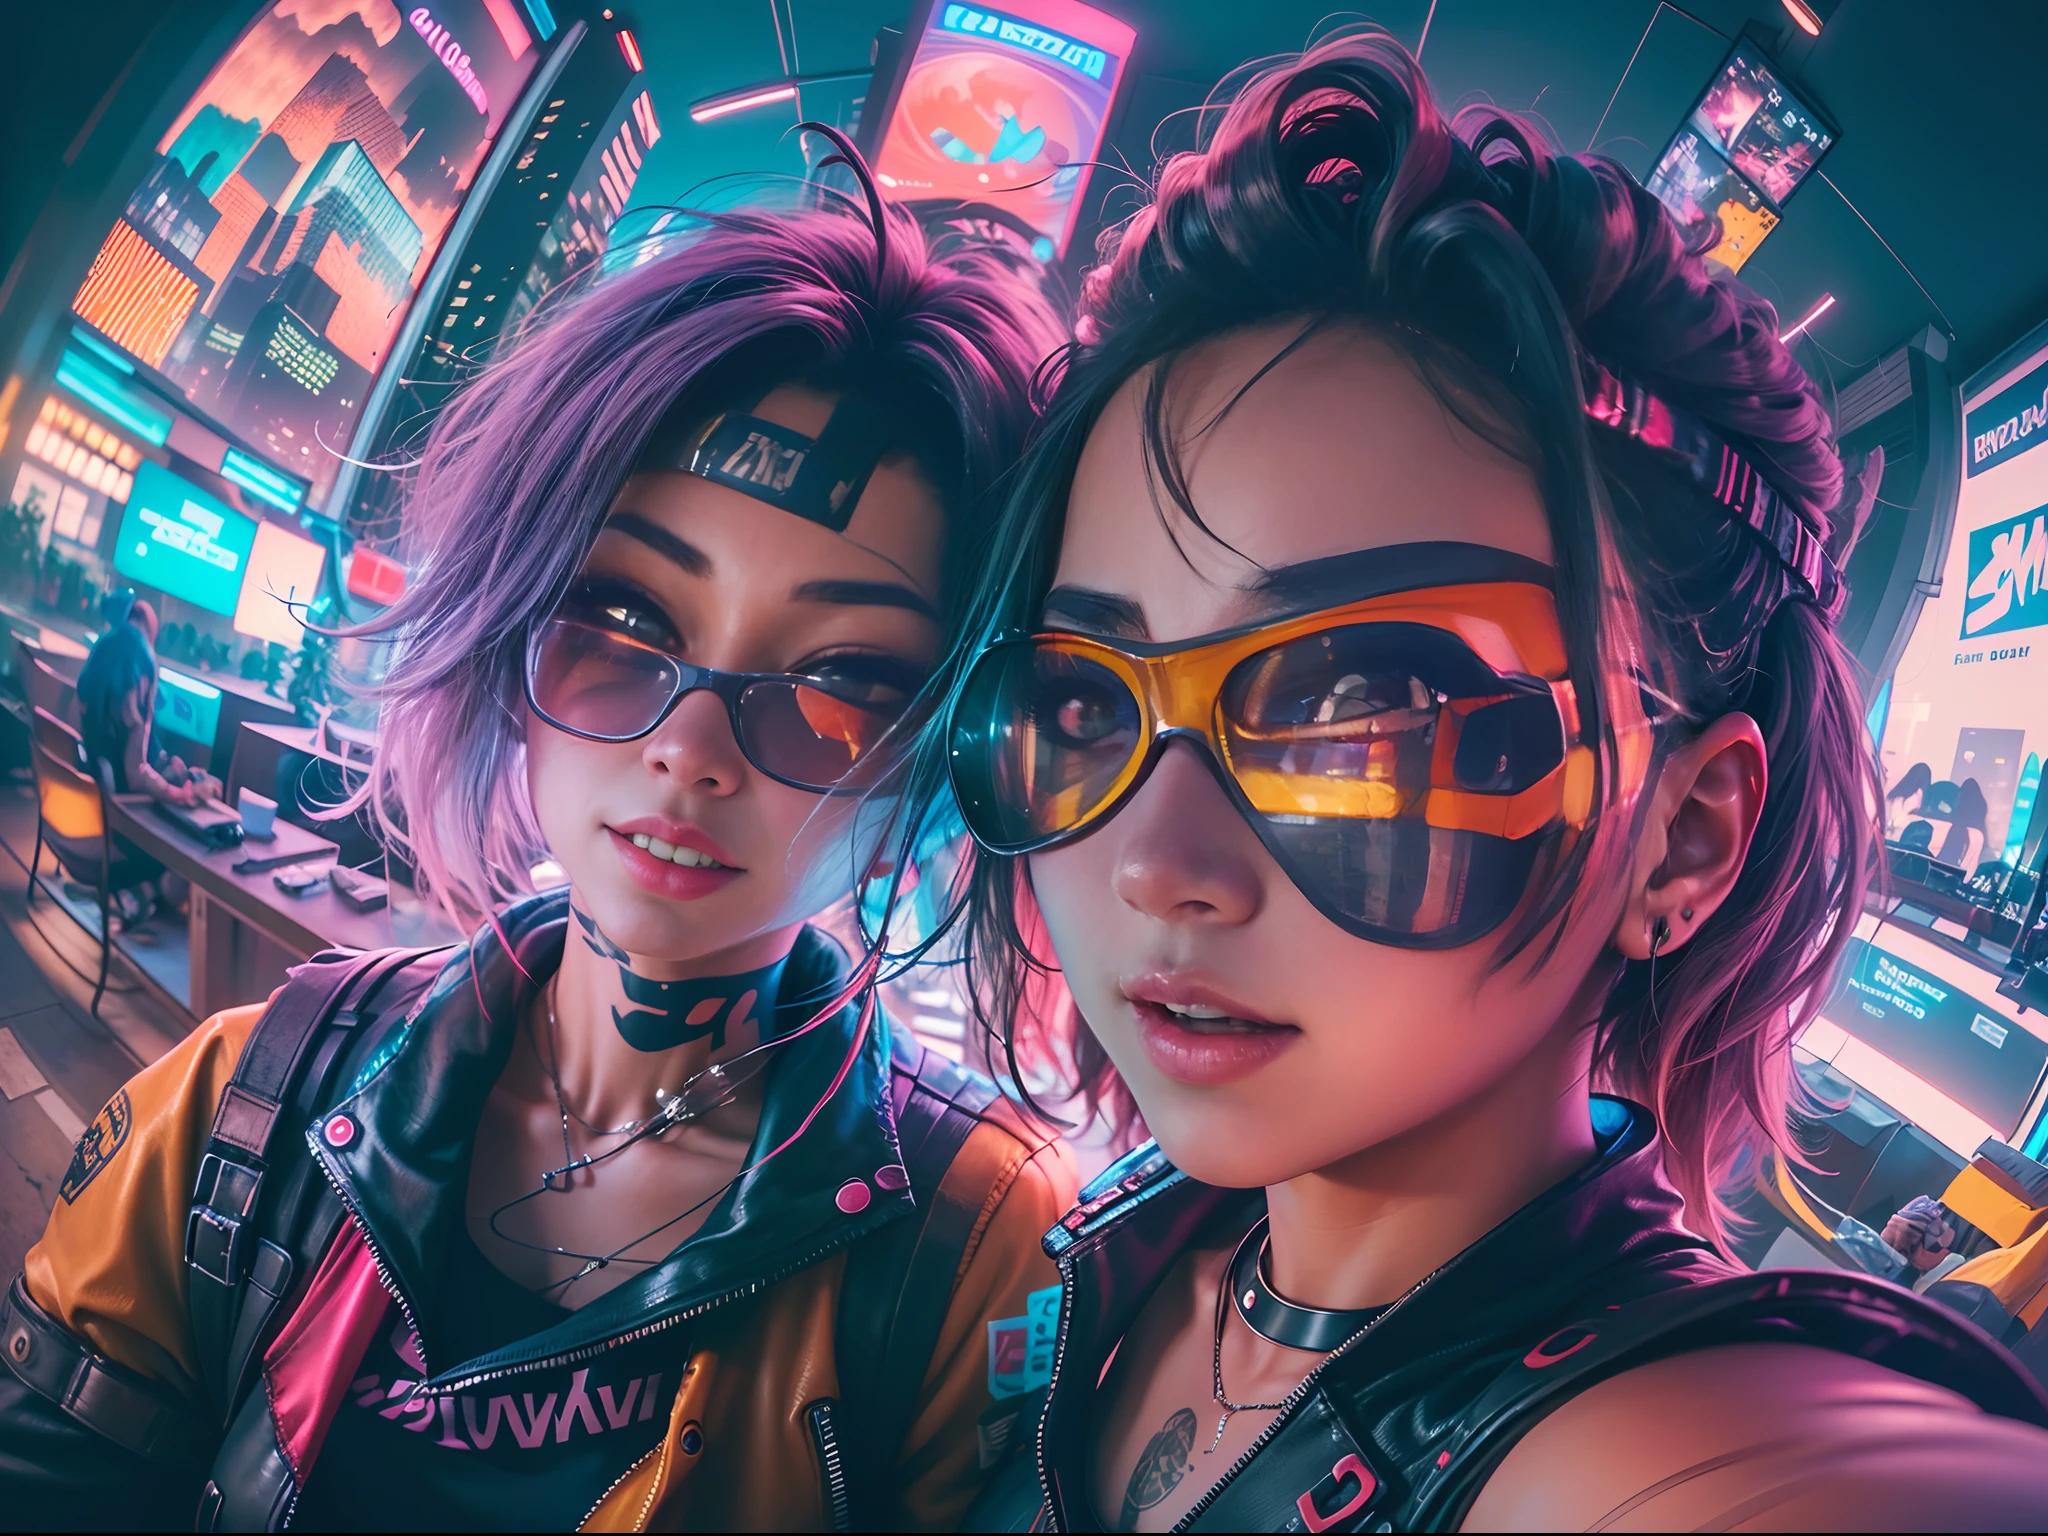 ((2 cyberpunk girls wearing colorful Harajuku style pop outfit)), ((((fisheye lens)))), cowboy shot, wind, messy hair, ((cyberpunk 2077 cityscape)), (cyberpunk aesthetics and atmosphere:1.3), bright colors, smiling, ((cinematic lighting))